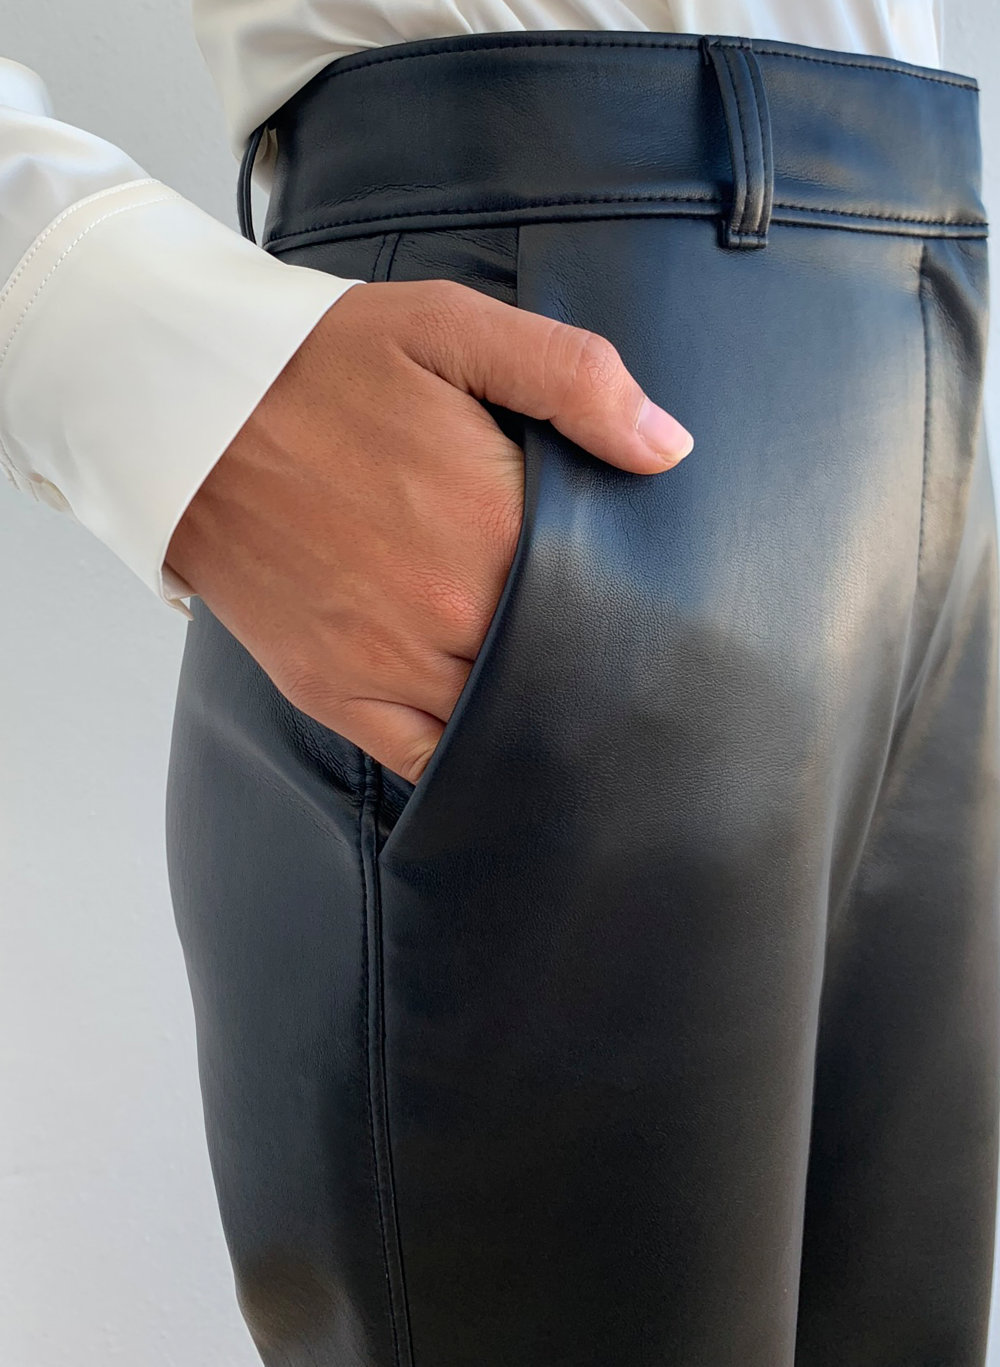 leather pants with bum cut out